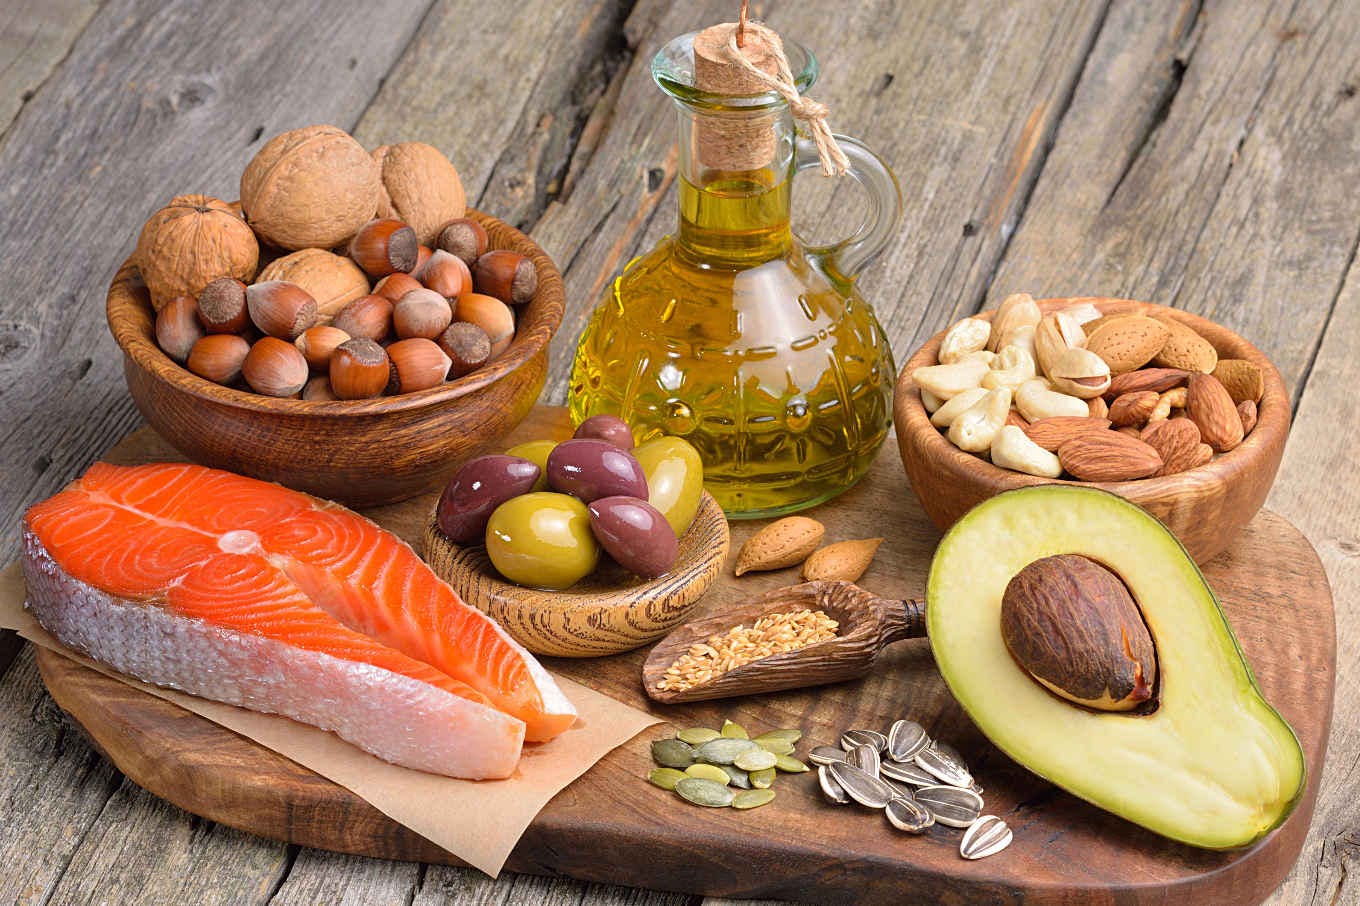 Monounsaturated Fats